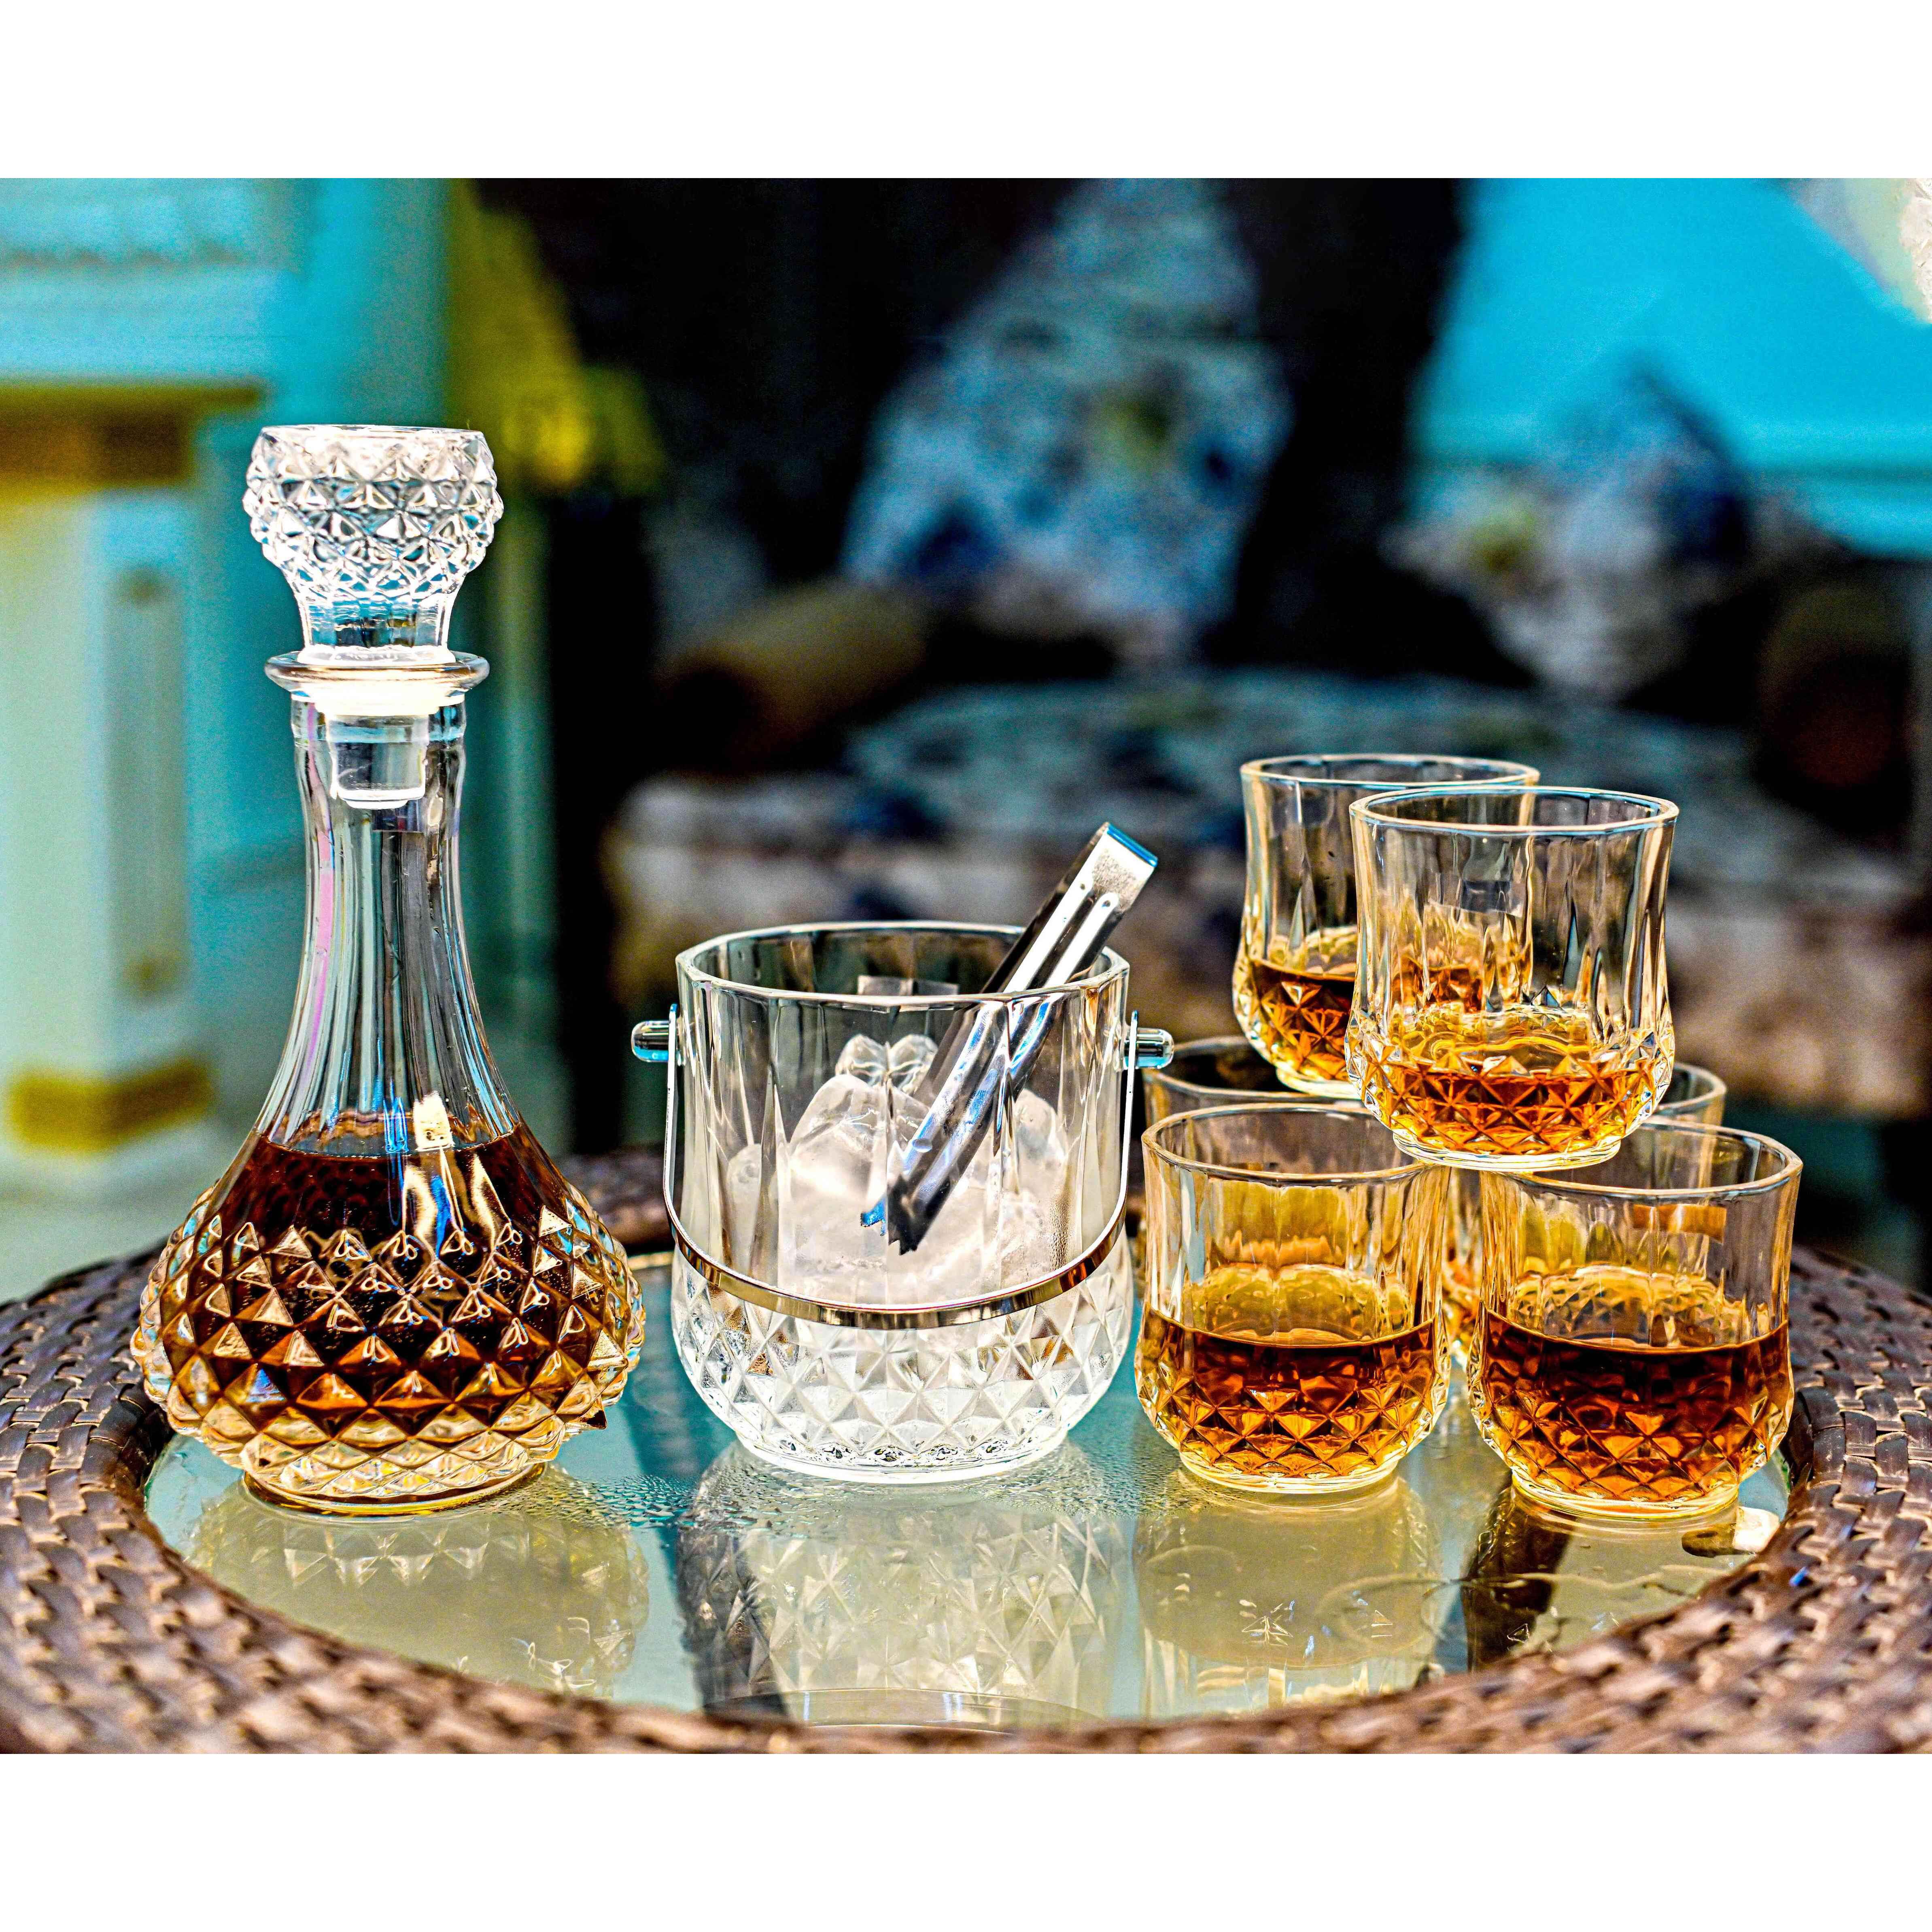 The Epic Twist Crystal Decanter Set With Glasses